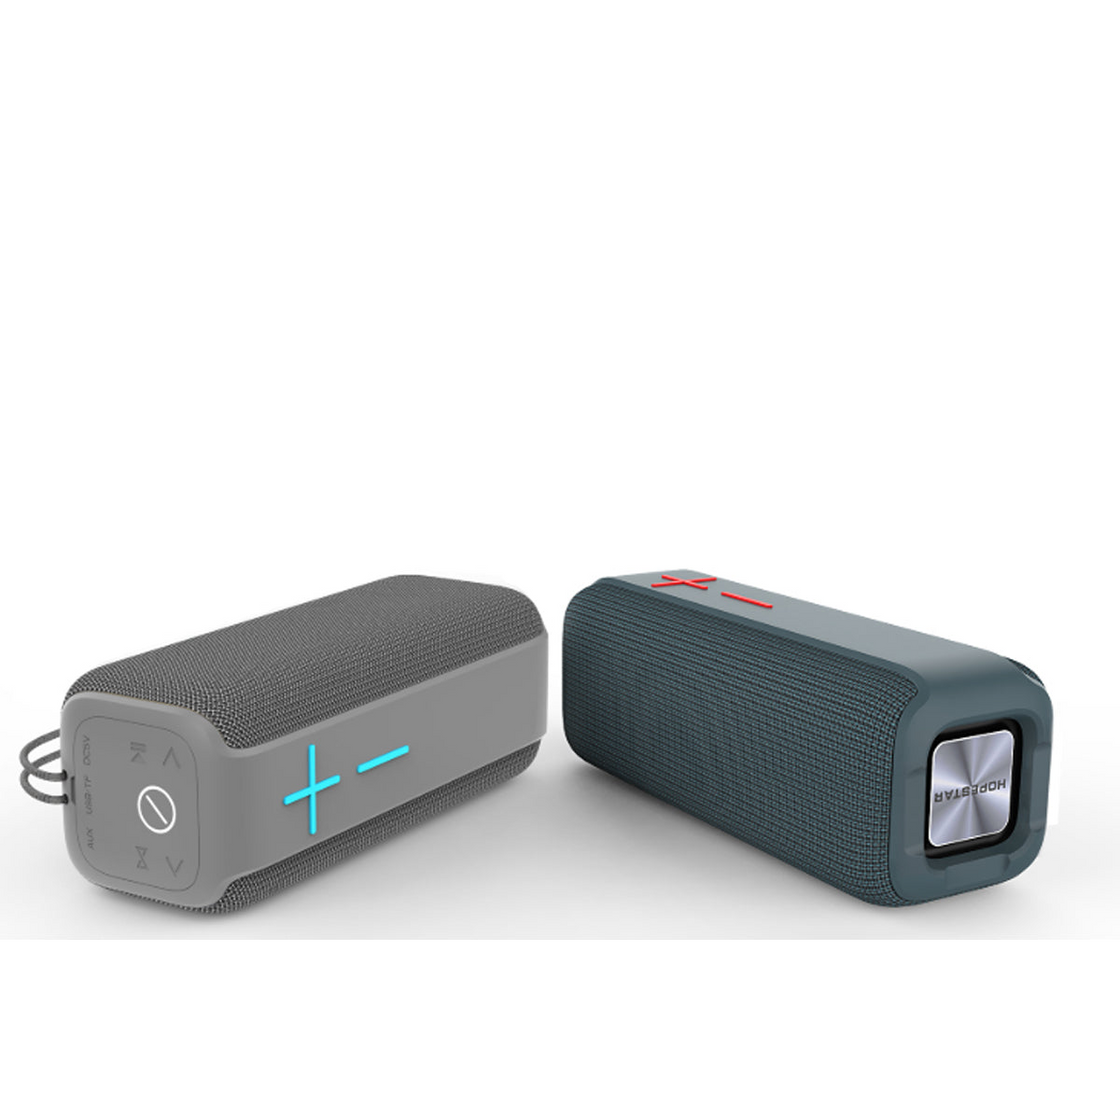 Studiophonic Bluetooth Speaker - High-Quality Sound and Portability